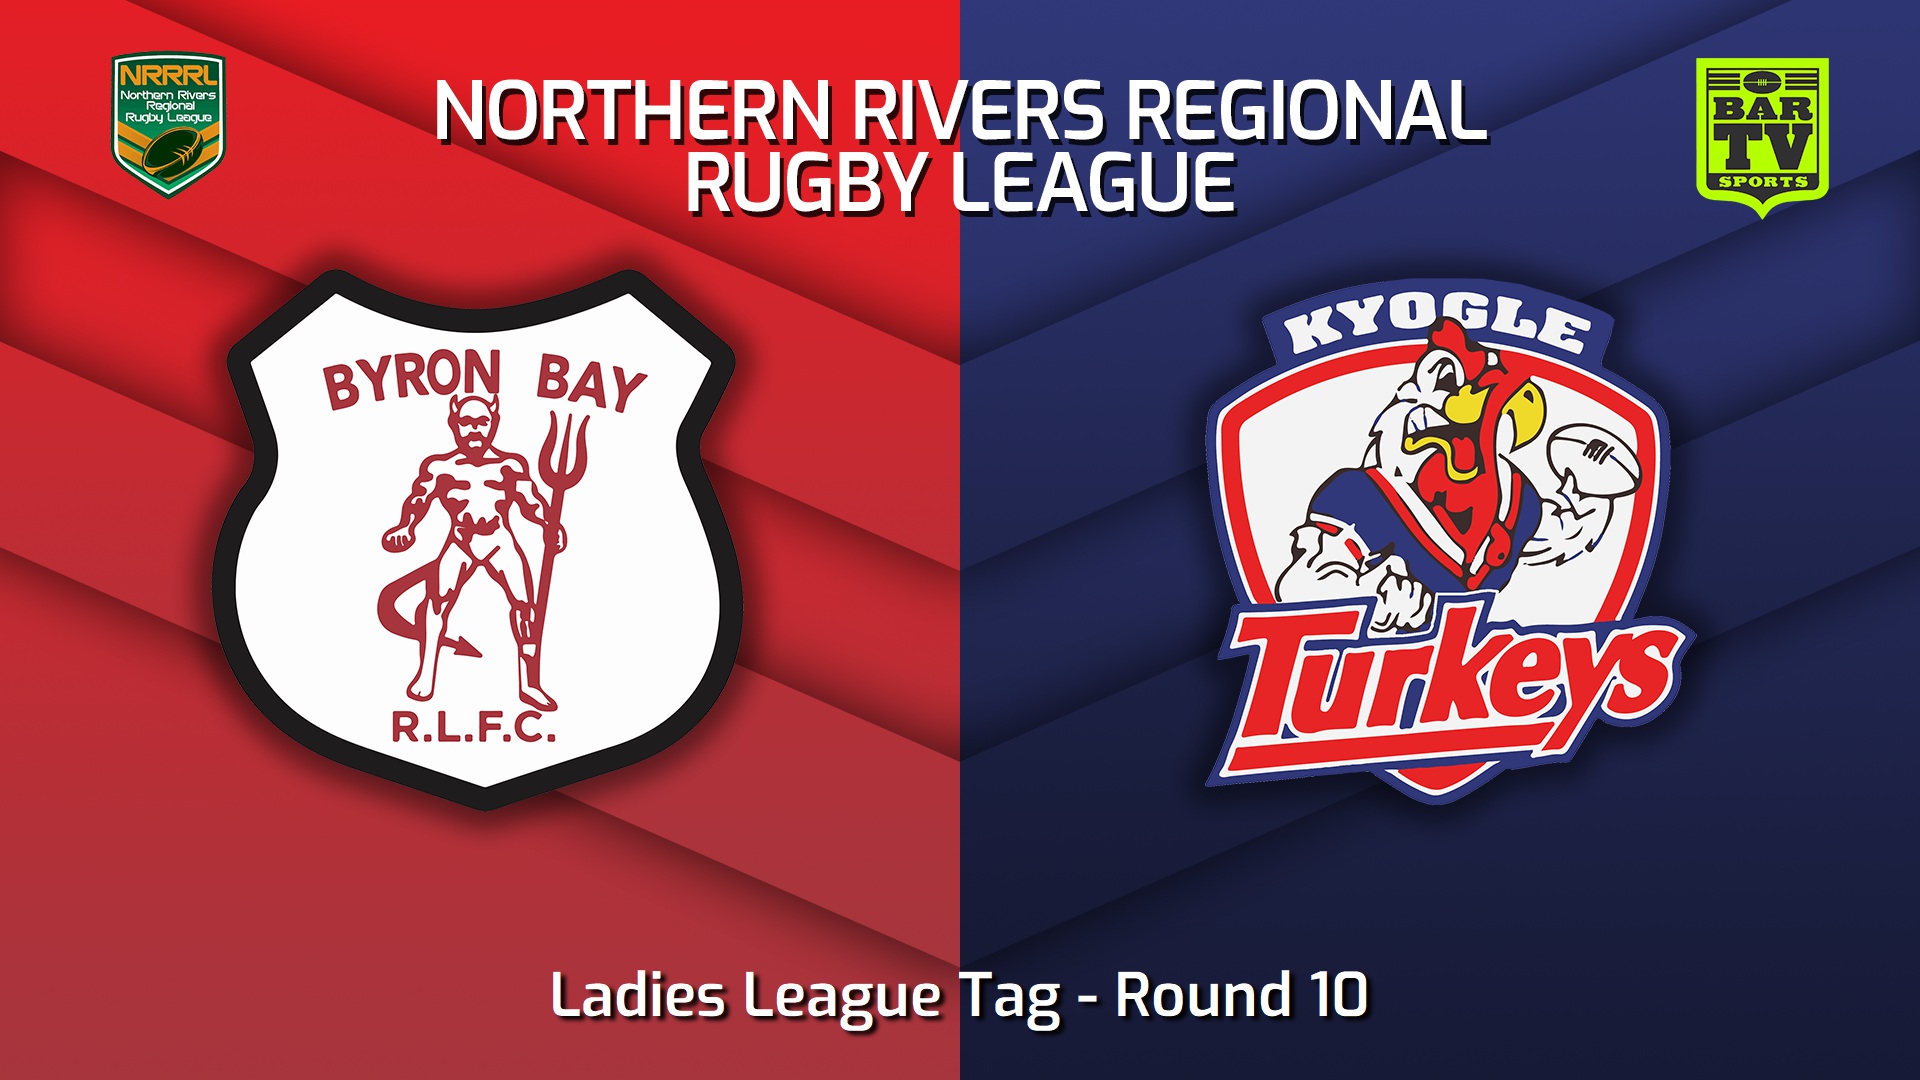 Northern Rivers Round 10 - Ladies League Tag